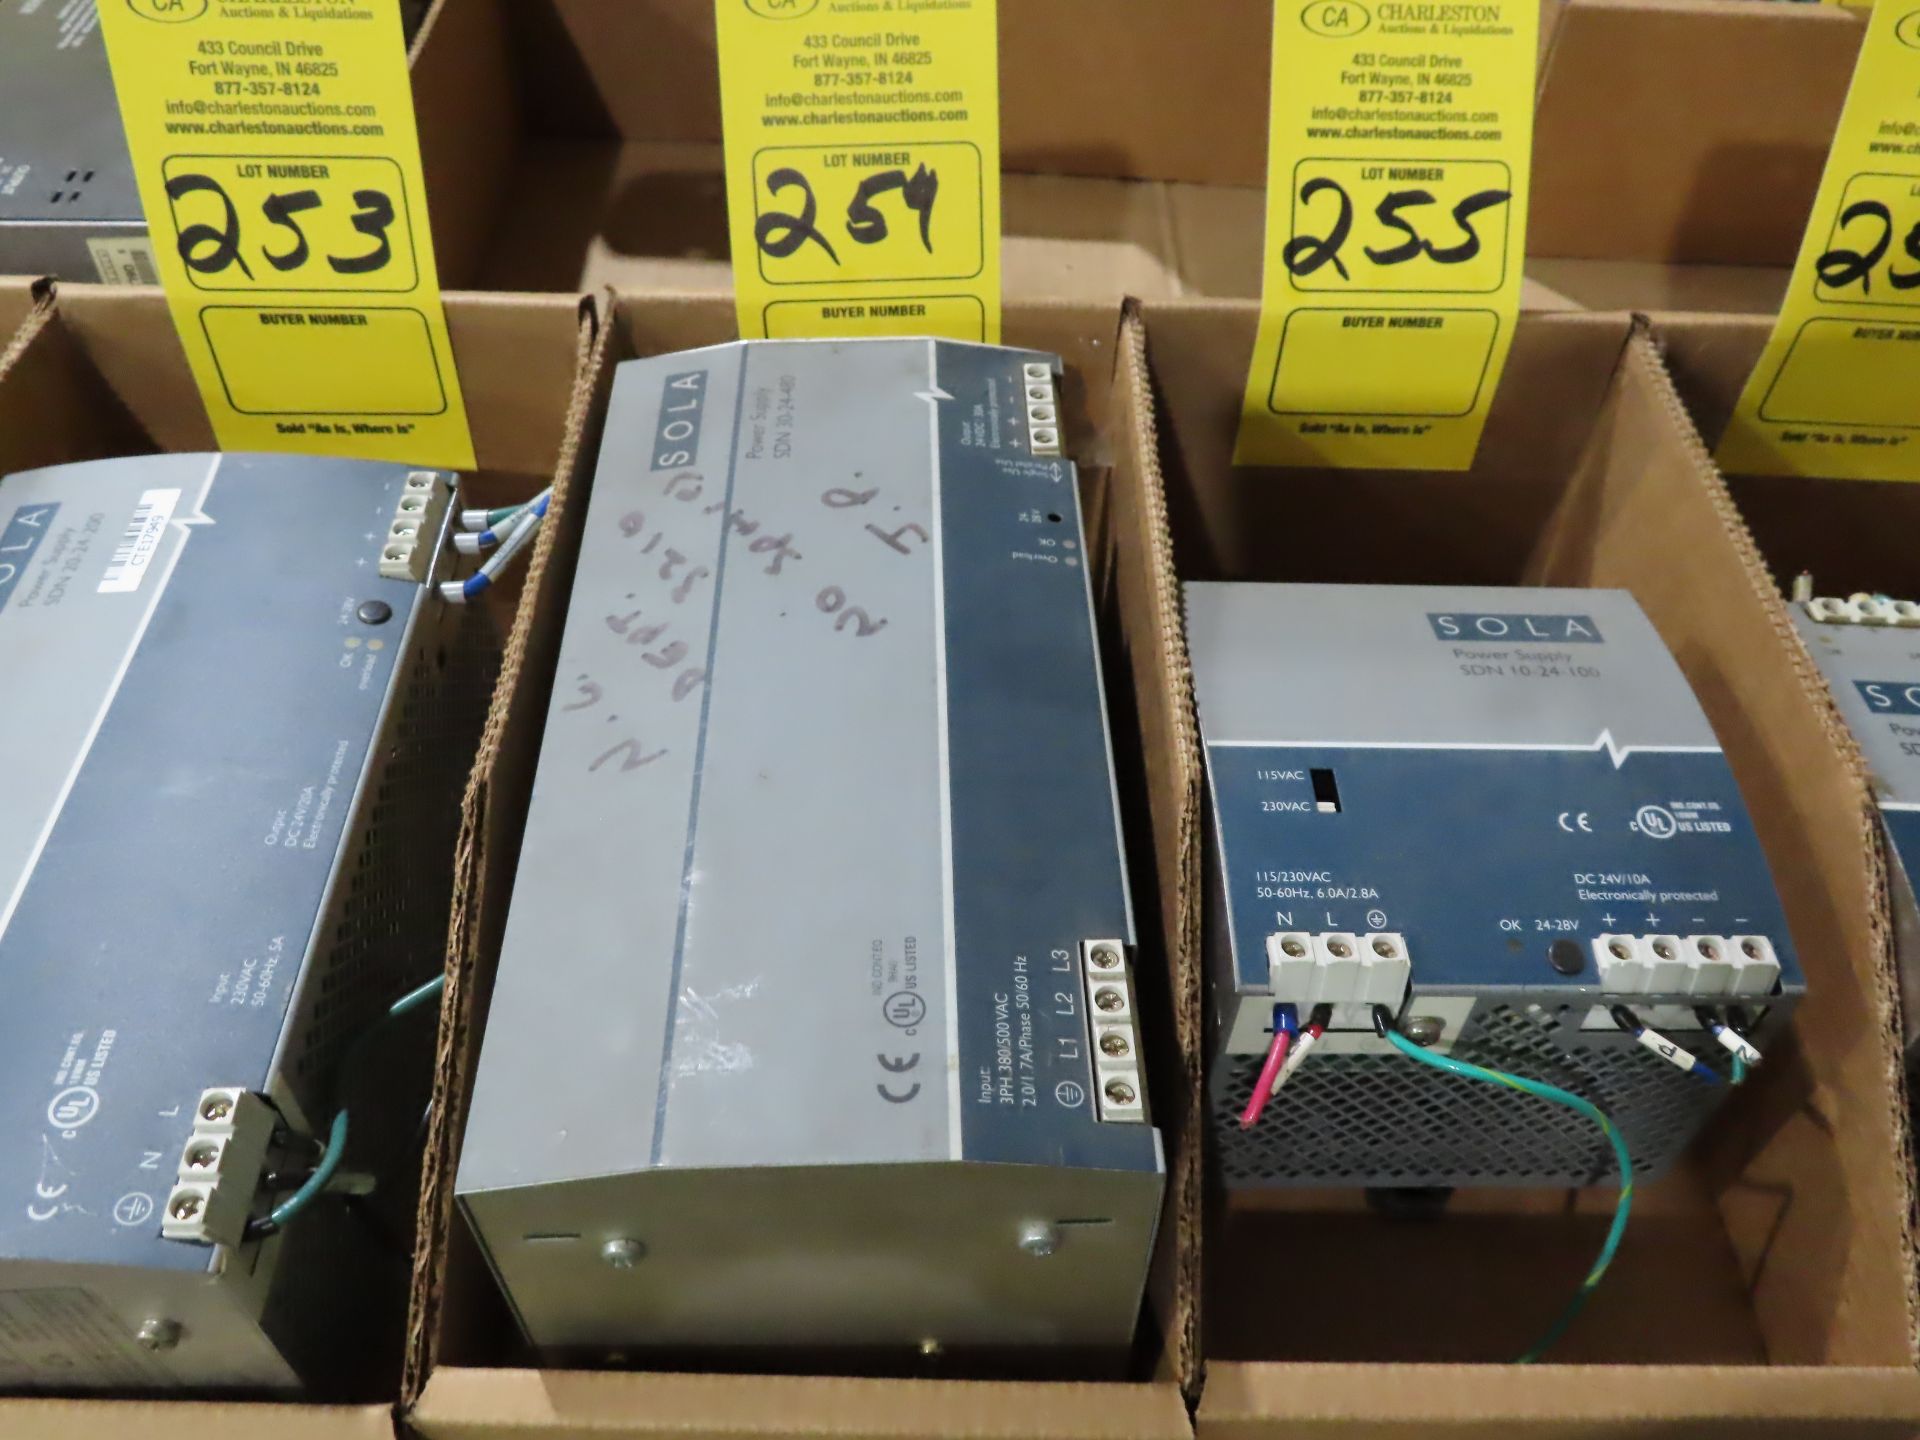 Sola model SDN30-24-480 power supply, as always, with Brolyn LLC auctions, all lots can be picked up